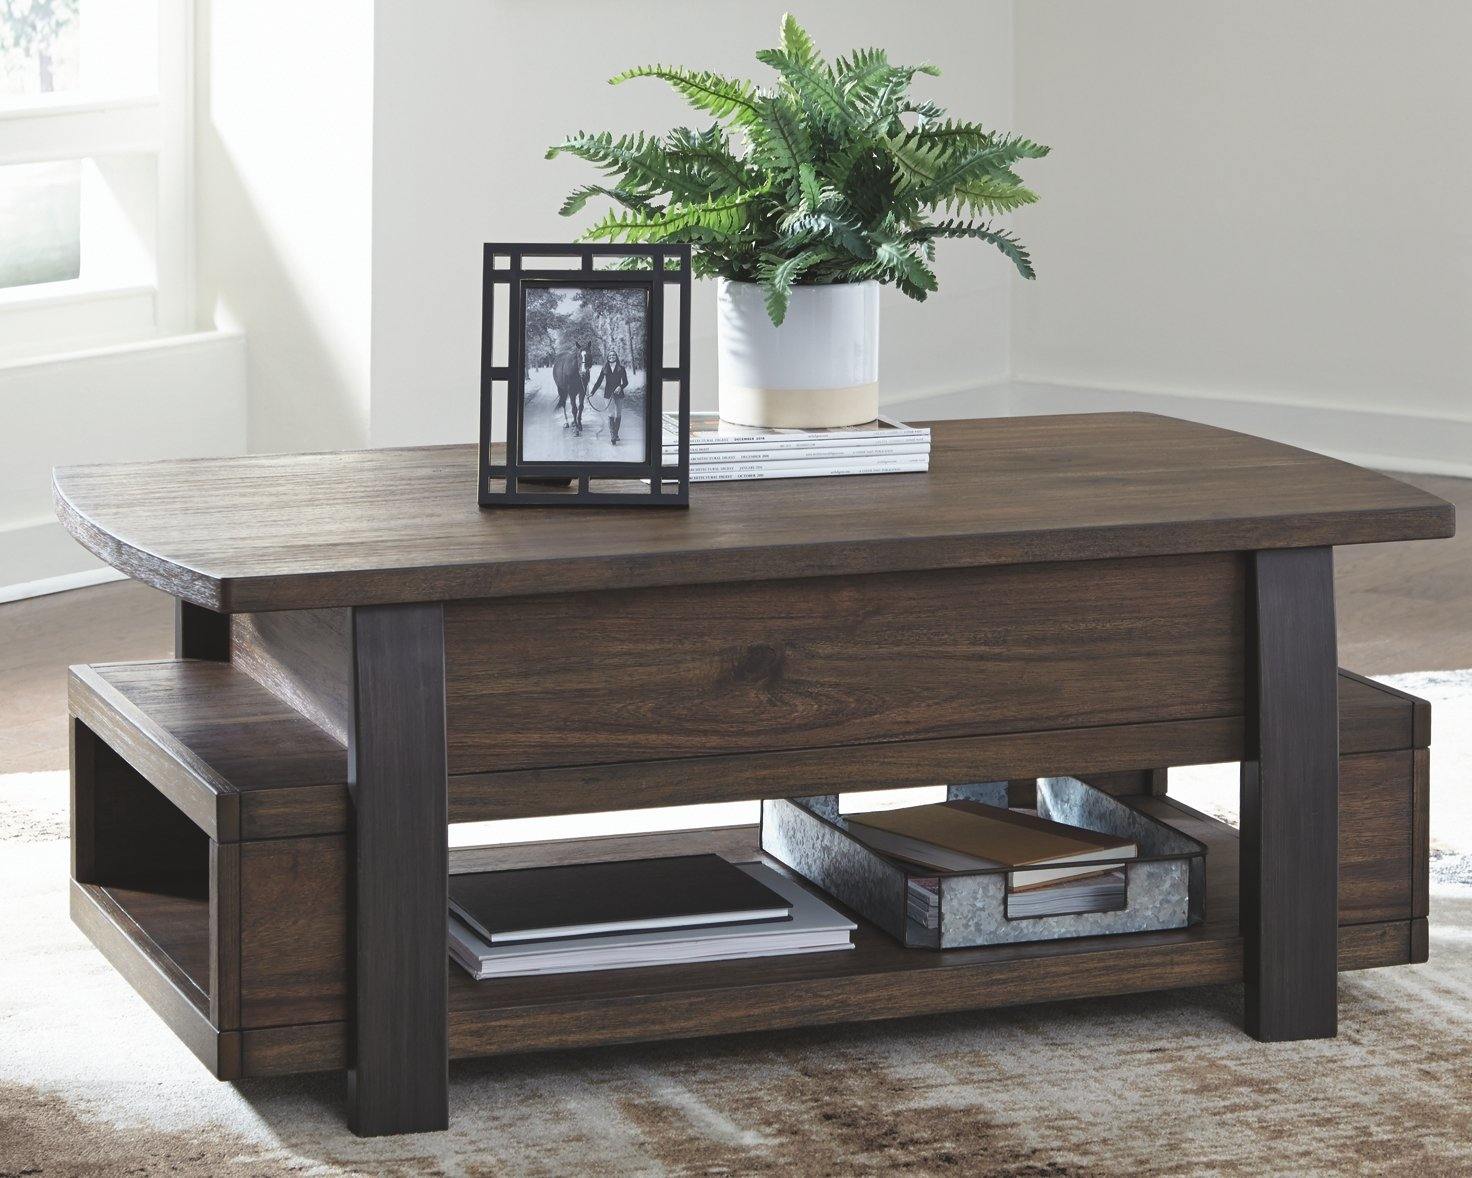 Vailbry Coffee Table with Lift Top T758-9 Motion Occasionals By ashley - sofafair.com